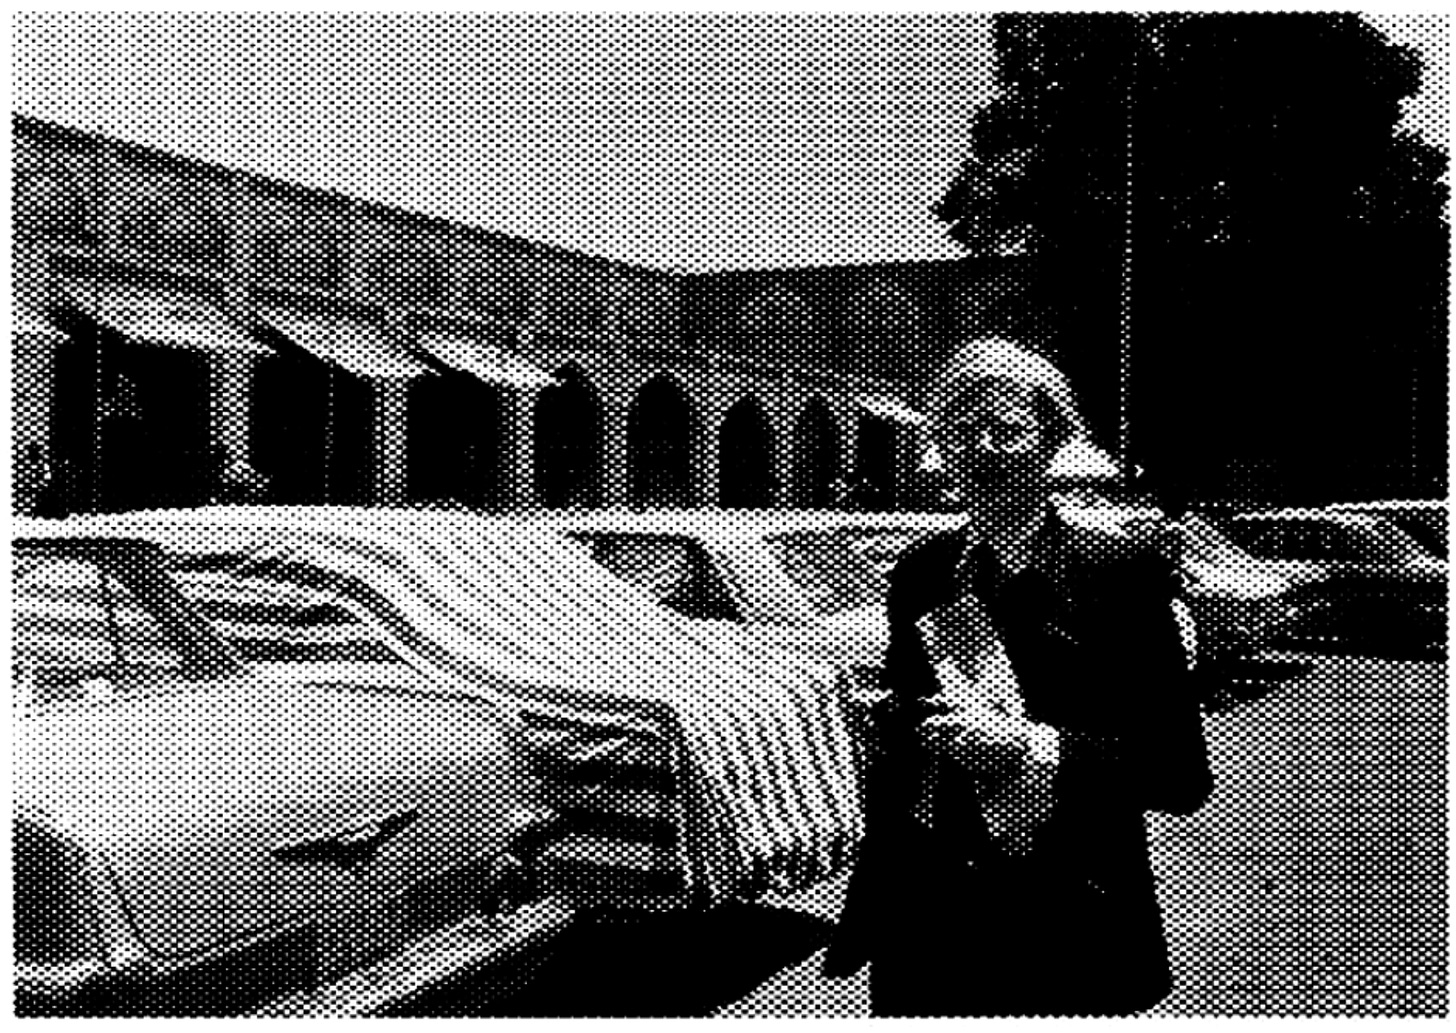 Andy Warhol in Iran with a screenprint effect